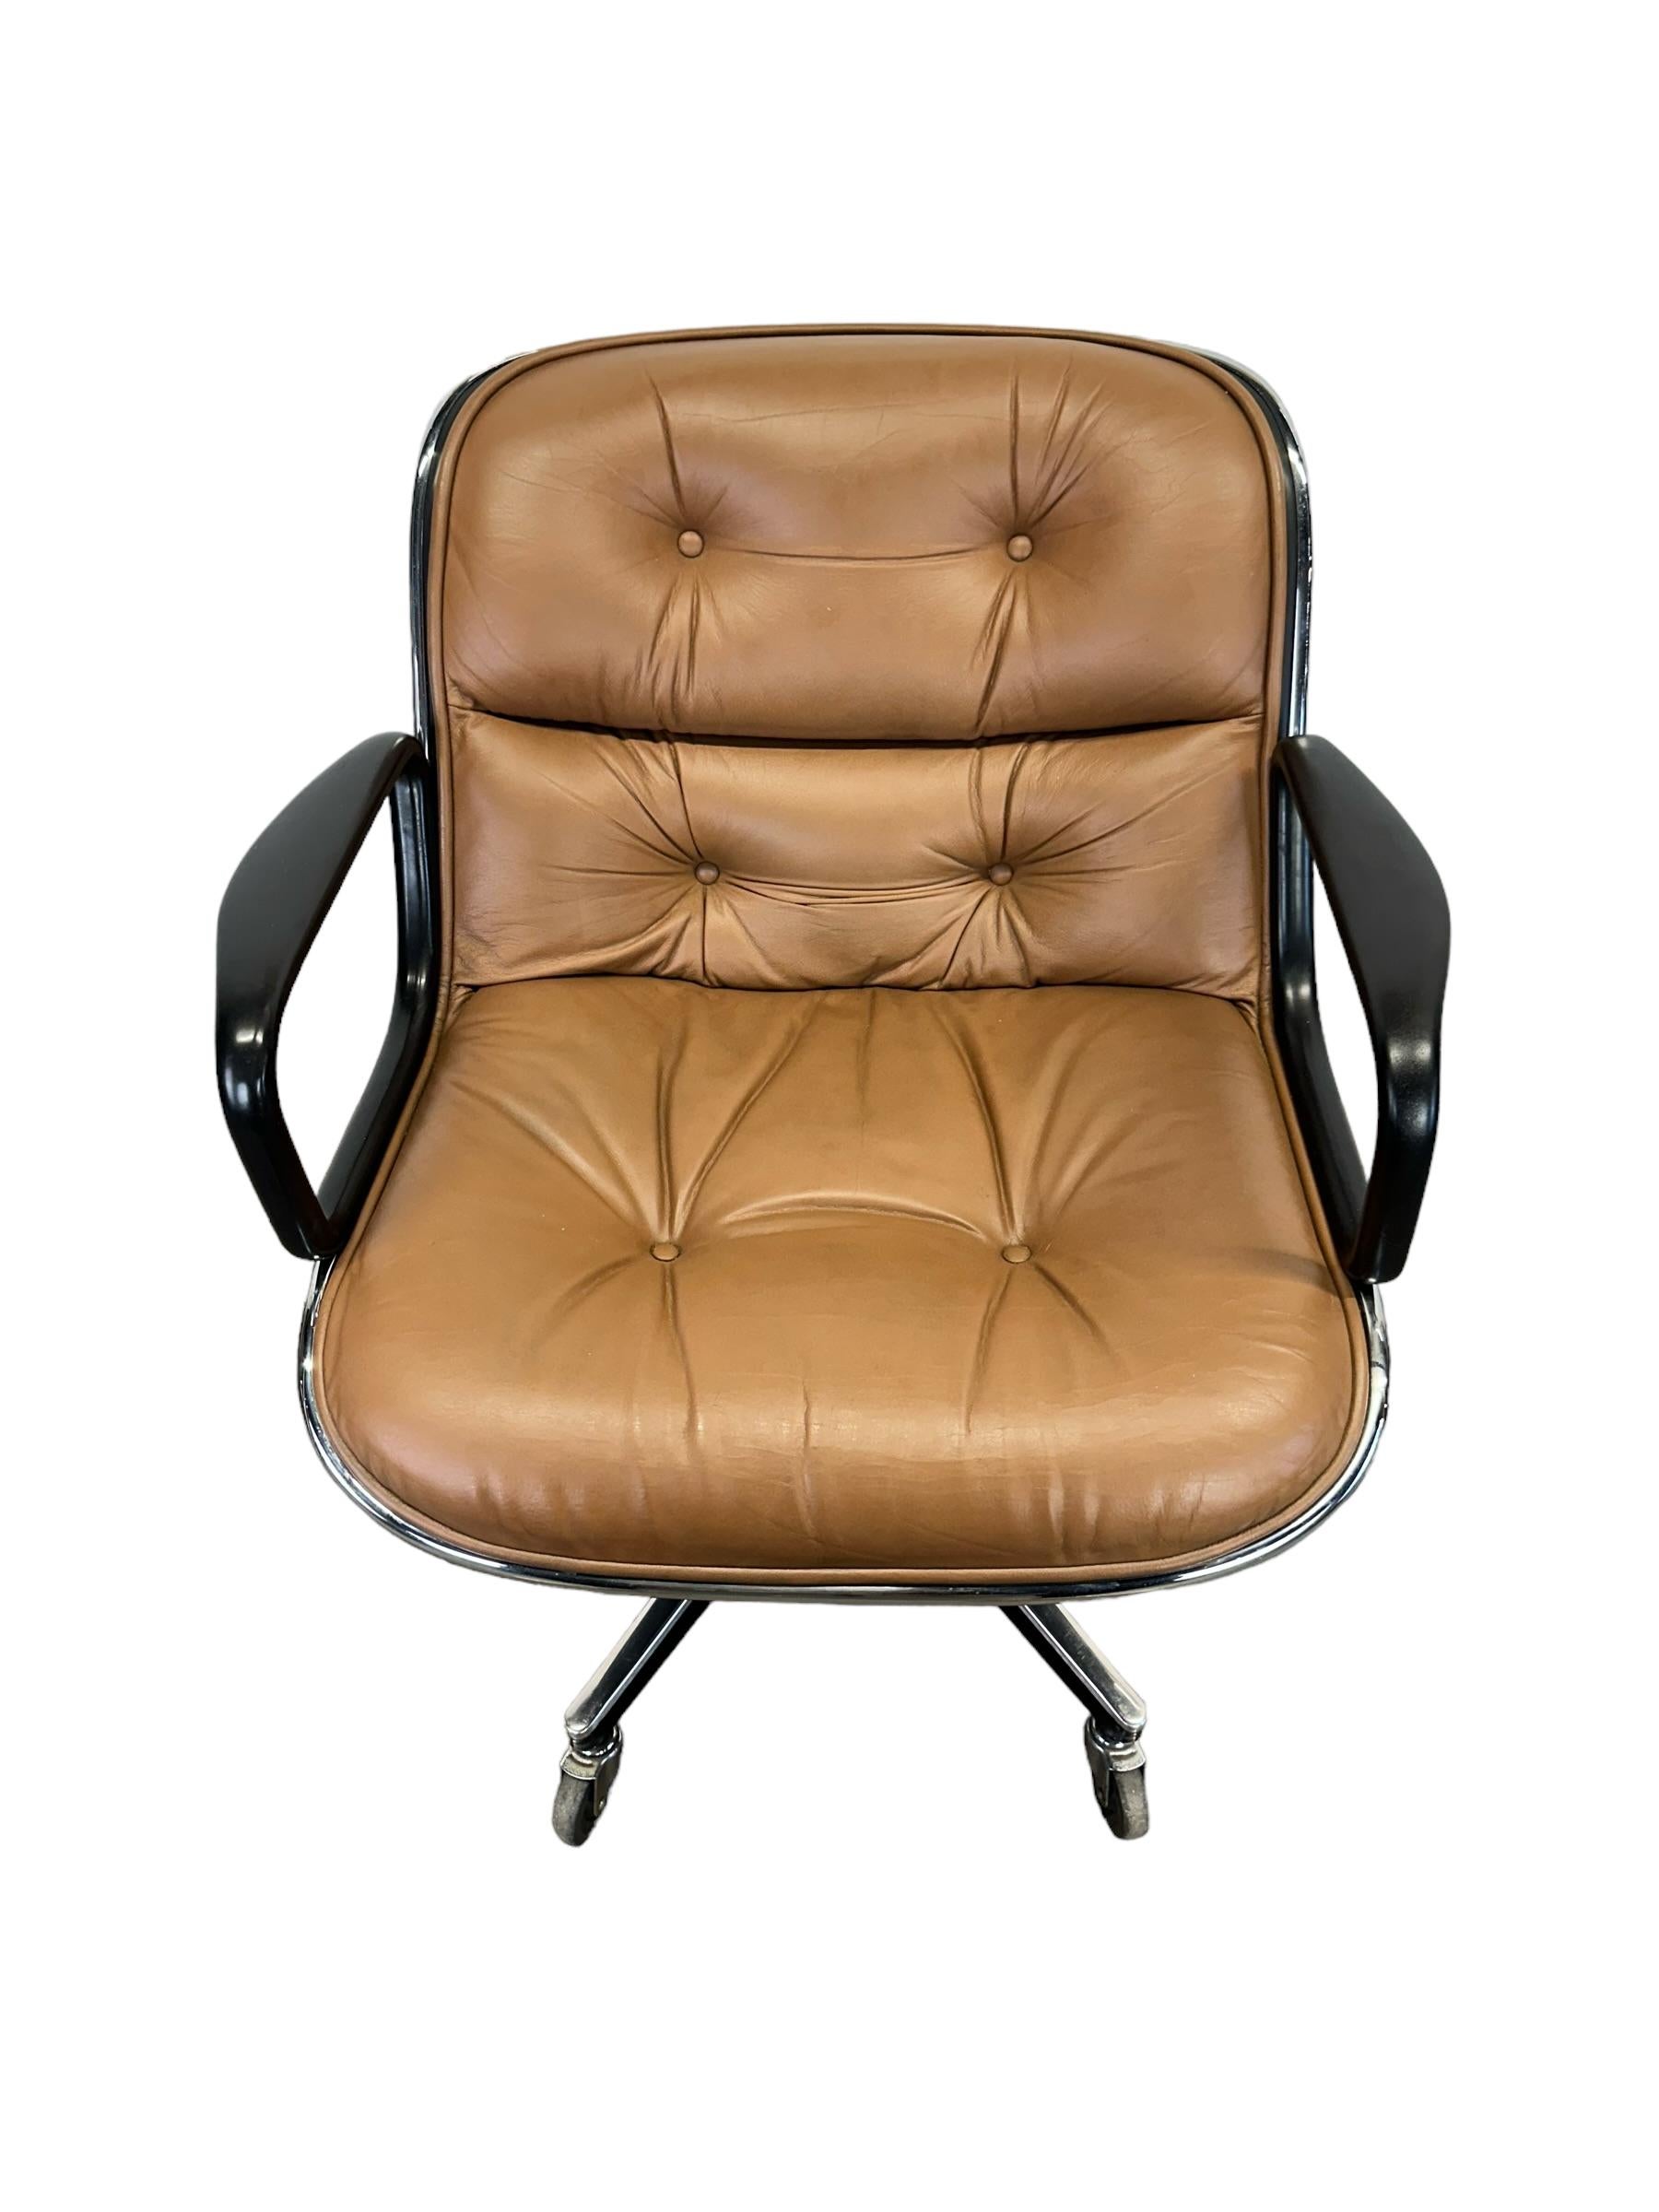 Vintage Charles Pollock for Knoll executive chair in medium brown. This executive desk chair has a tilt and swivel base with adjustable height. Swivel base with all wheels in working condition. Leather has been dyed brown and is in good used